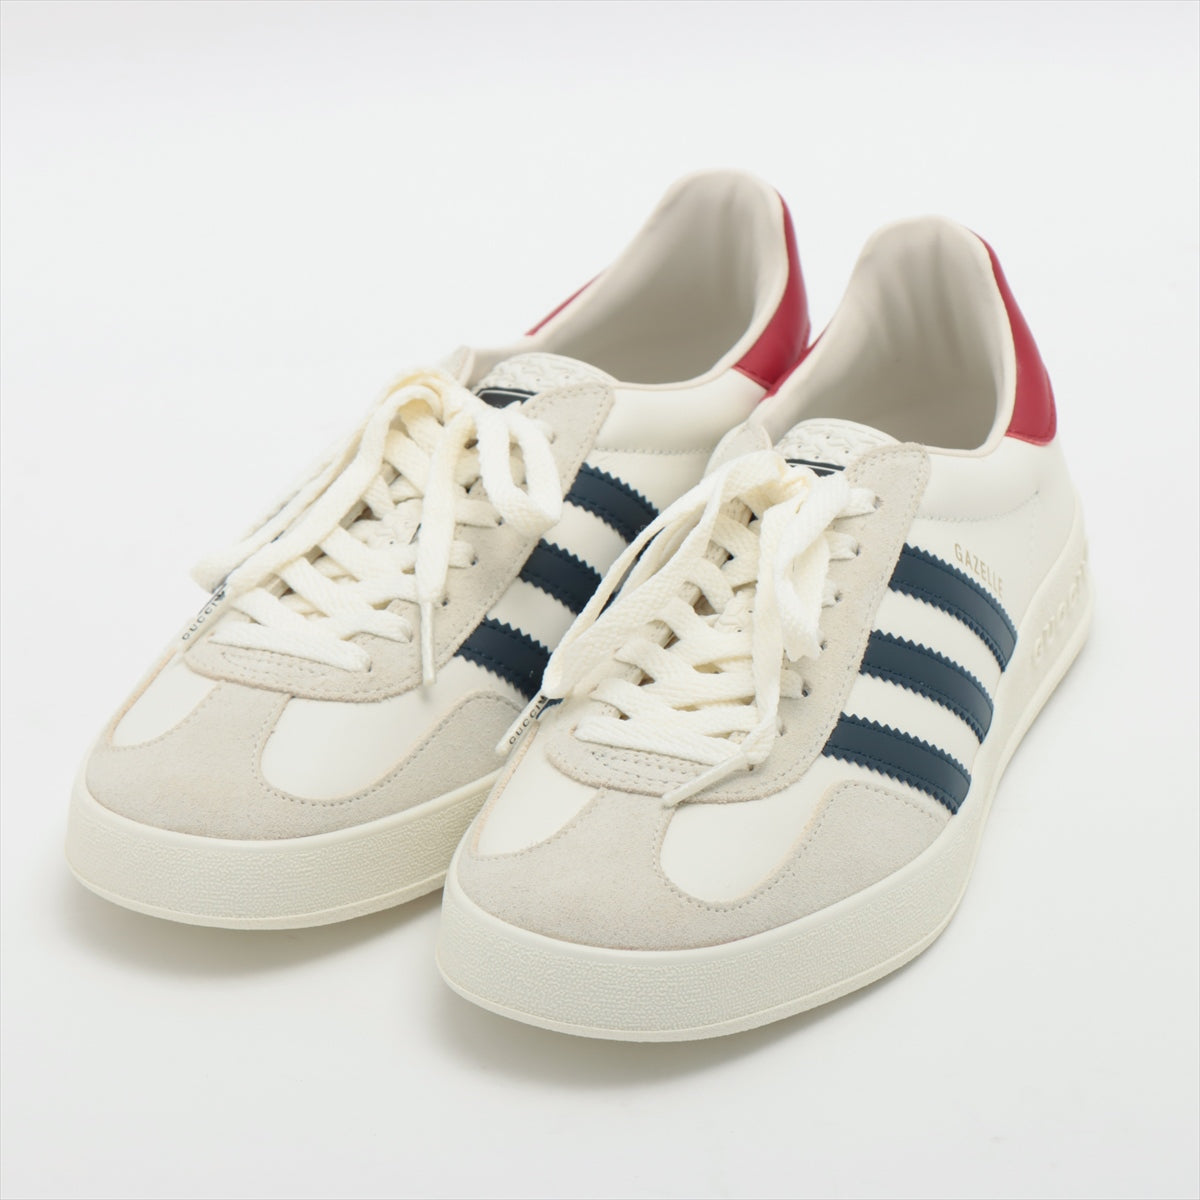 Gucci x adidas Gazelle Leather & suede Sneakers 26cm Men's White 646652 Is there a replacement string